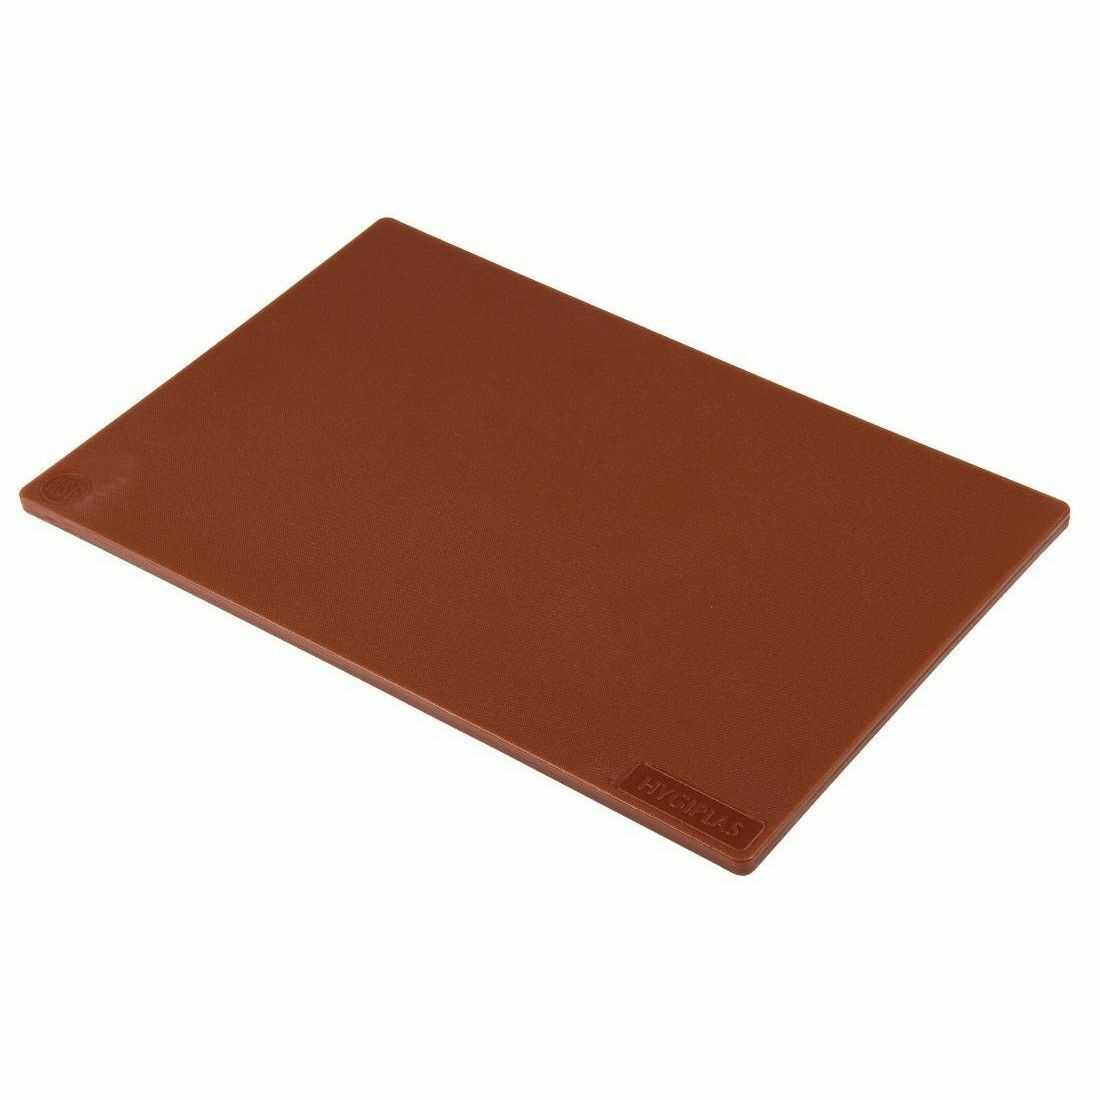 Brown Kitchen Chopping Board Commercial Cutting Board Colour Coded Hygiene Catering Food Cutting Set